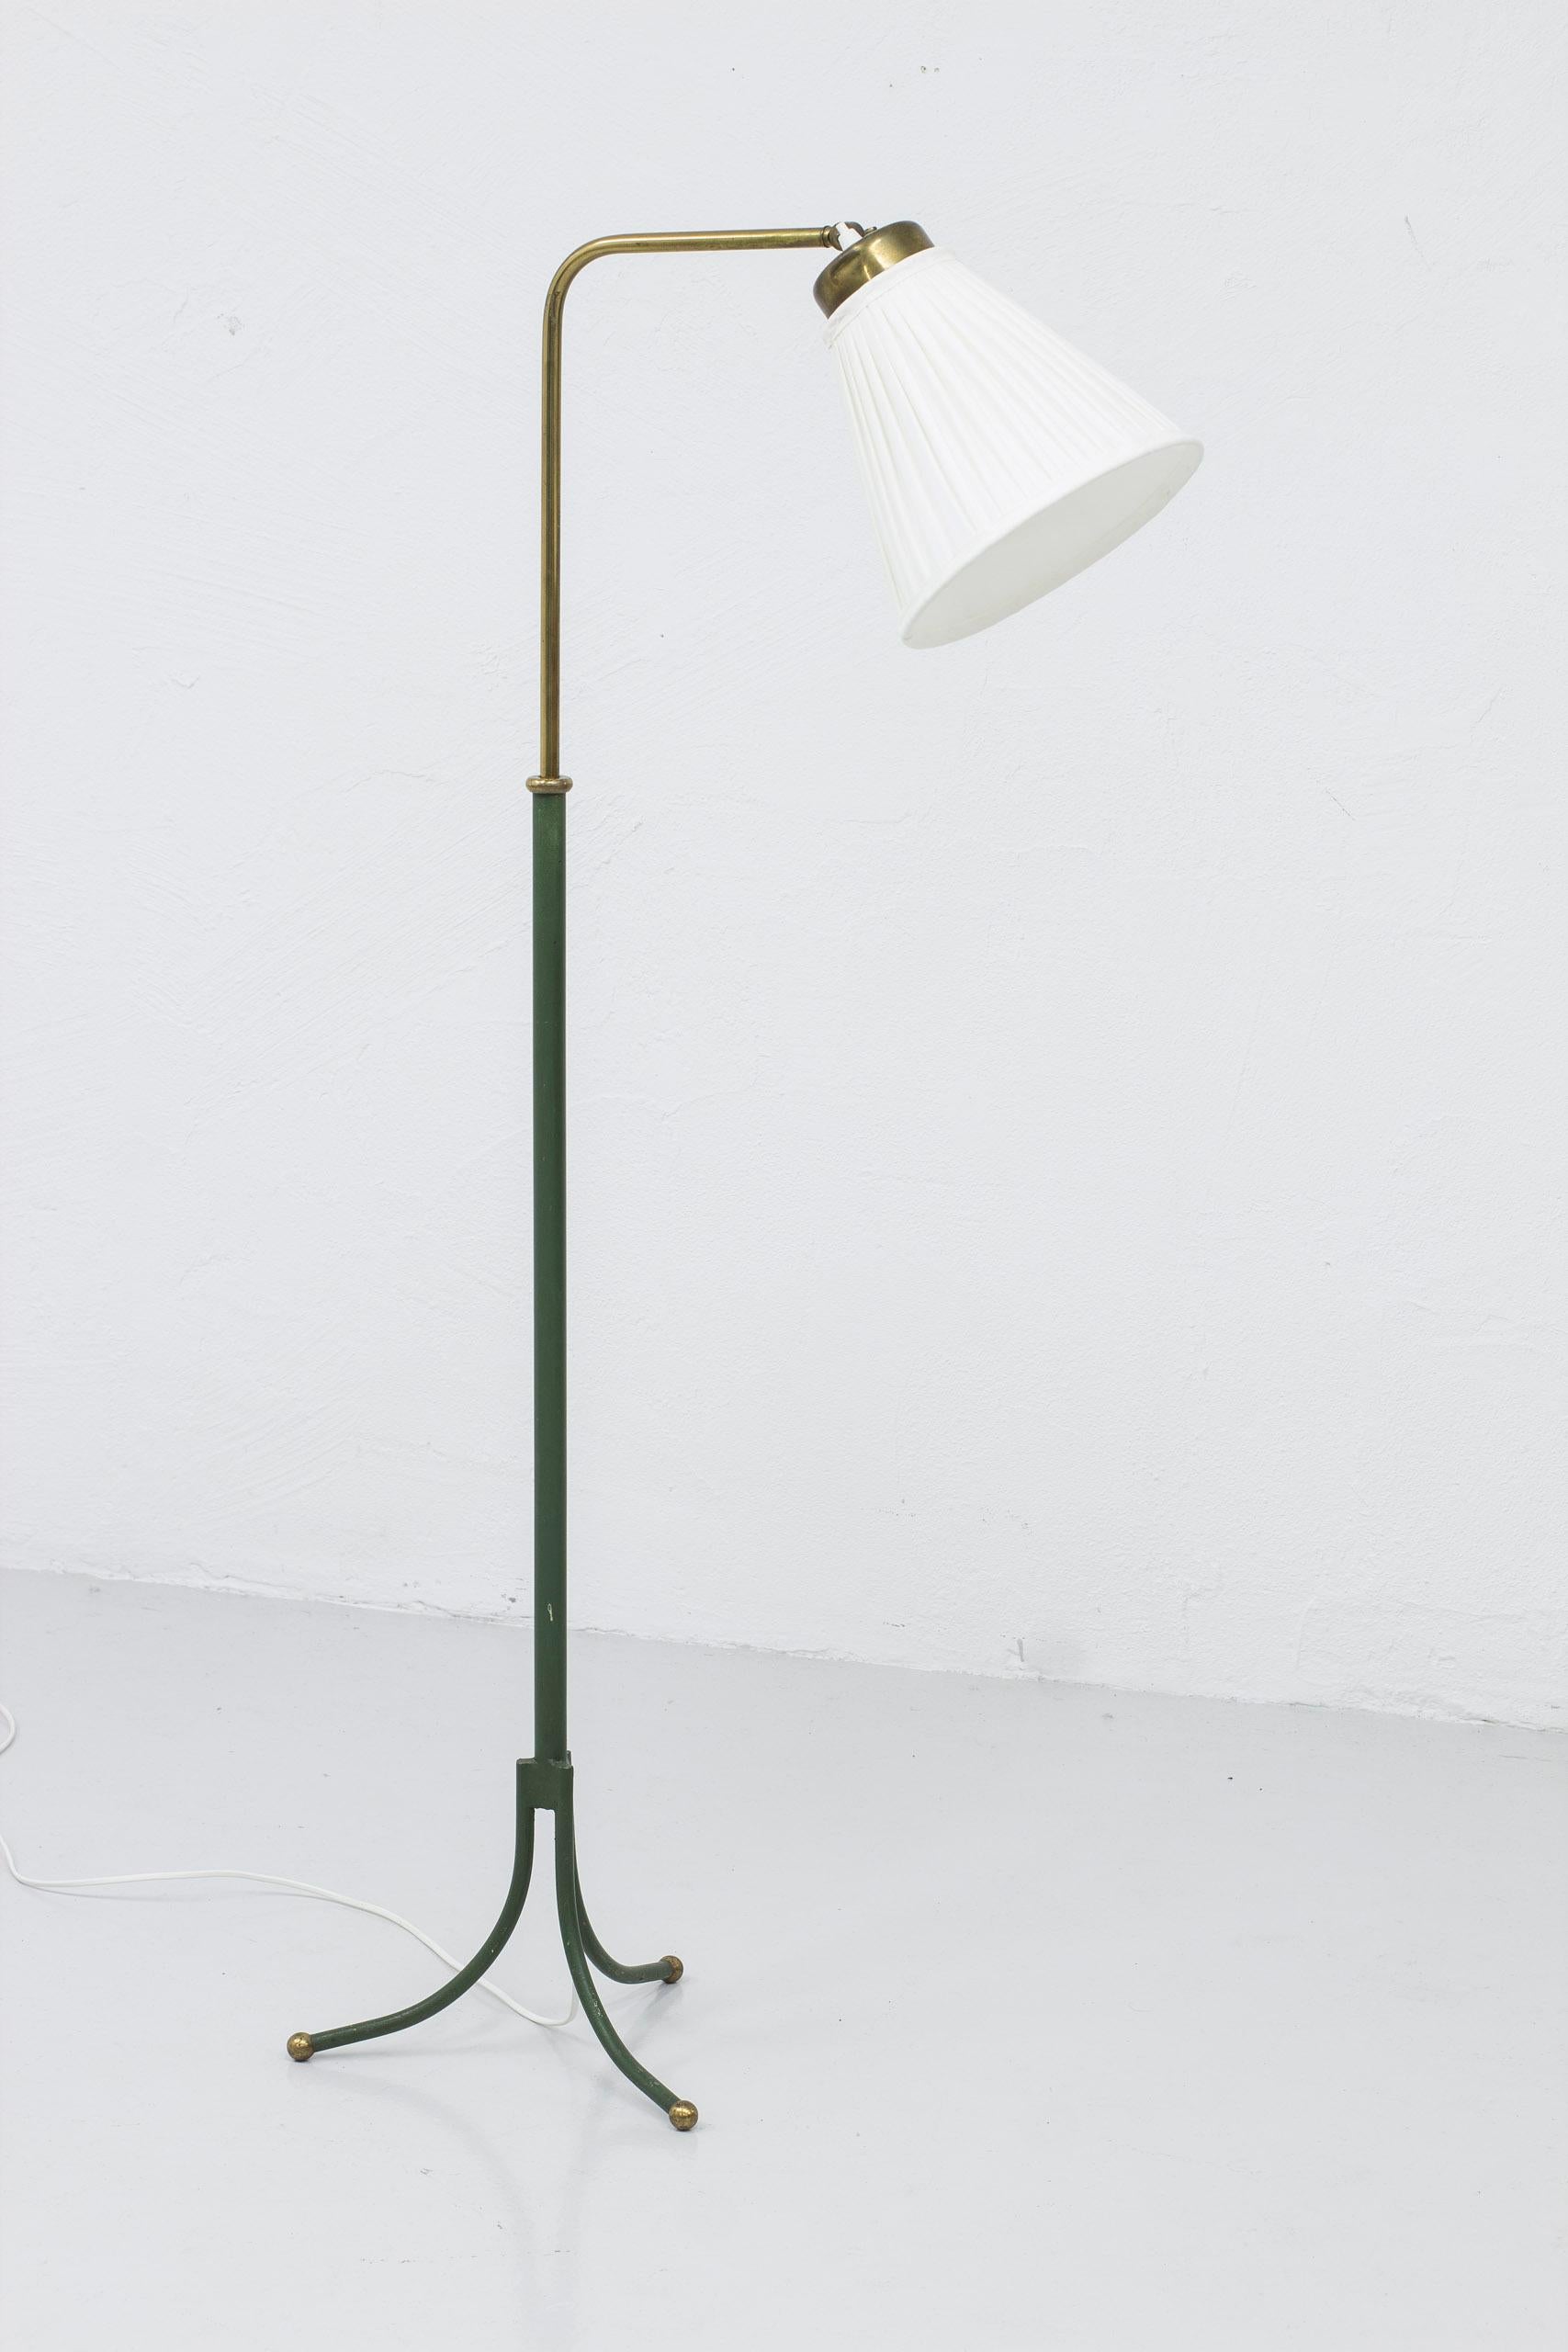 Early floor lamp designed by Josef Frank. Model 1842 designed in the 1930s. This piece produced by Svenskt Tenn during the 1940s. Original green lacquer and brass. New hand sewn pleated lamp shade. Light switch on the top of the lamp in working